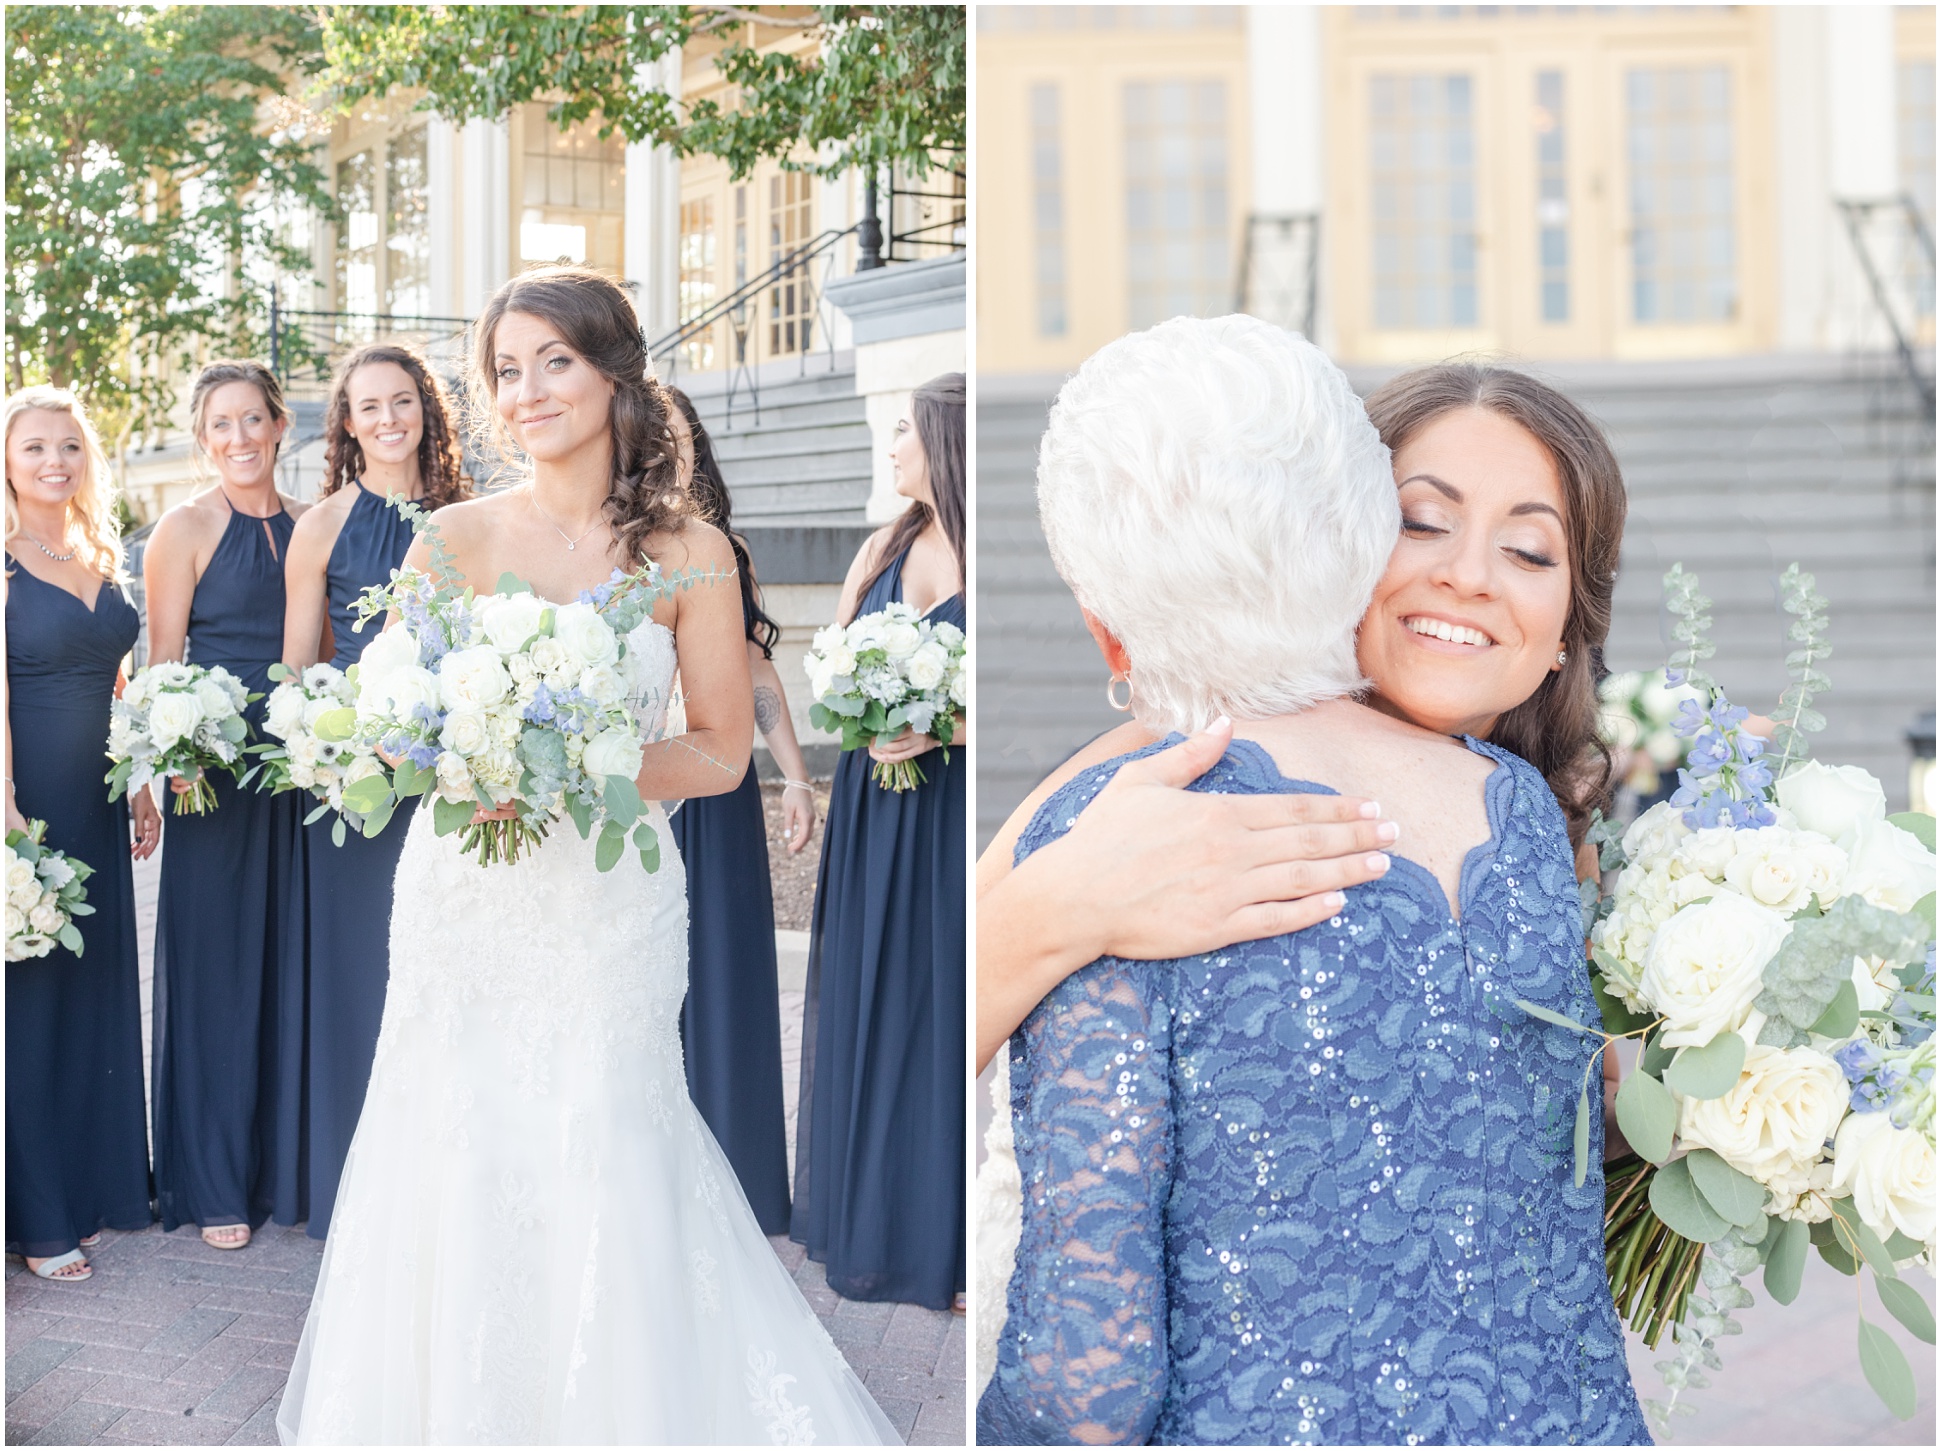 Left: Bride with her bridal party in navy blue long dresses, Right: Bride greeting her grandmother in law